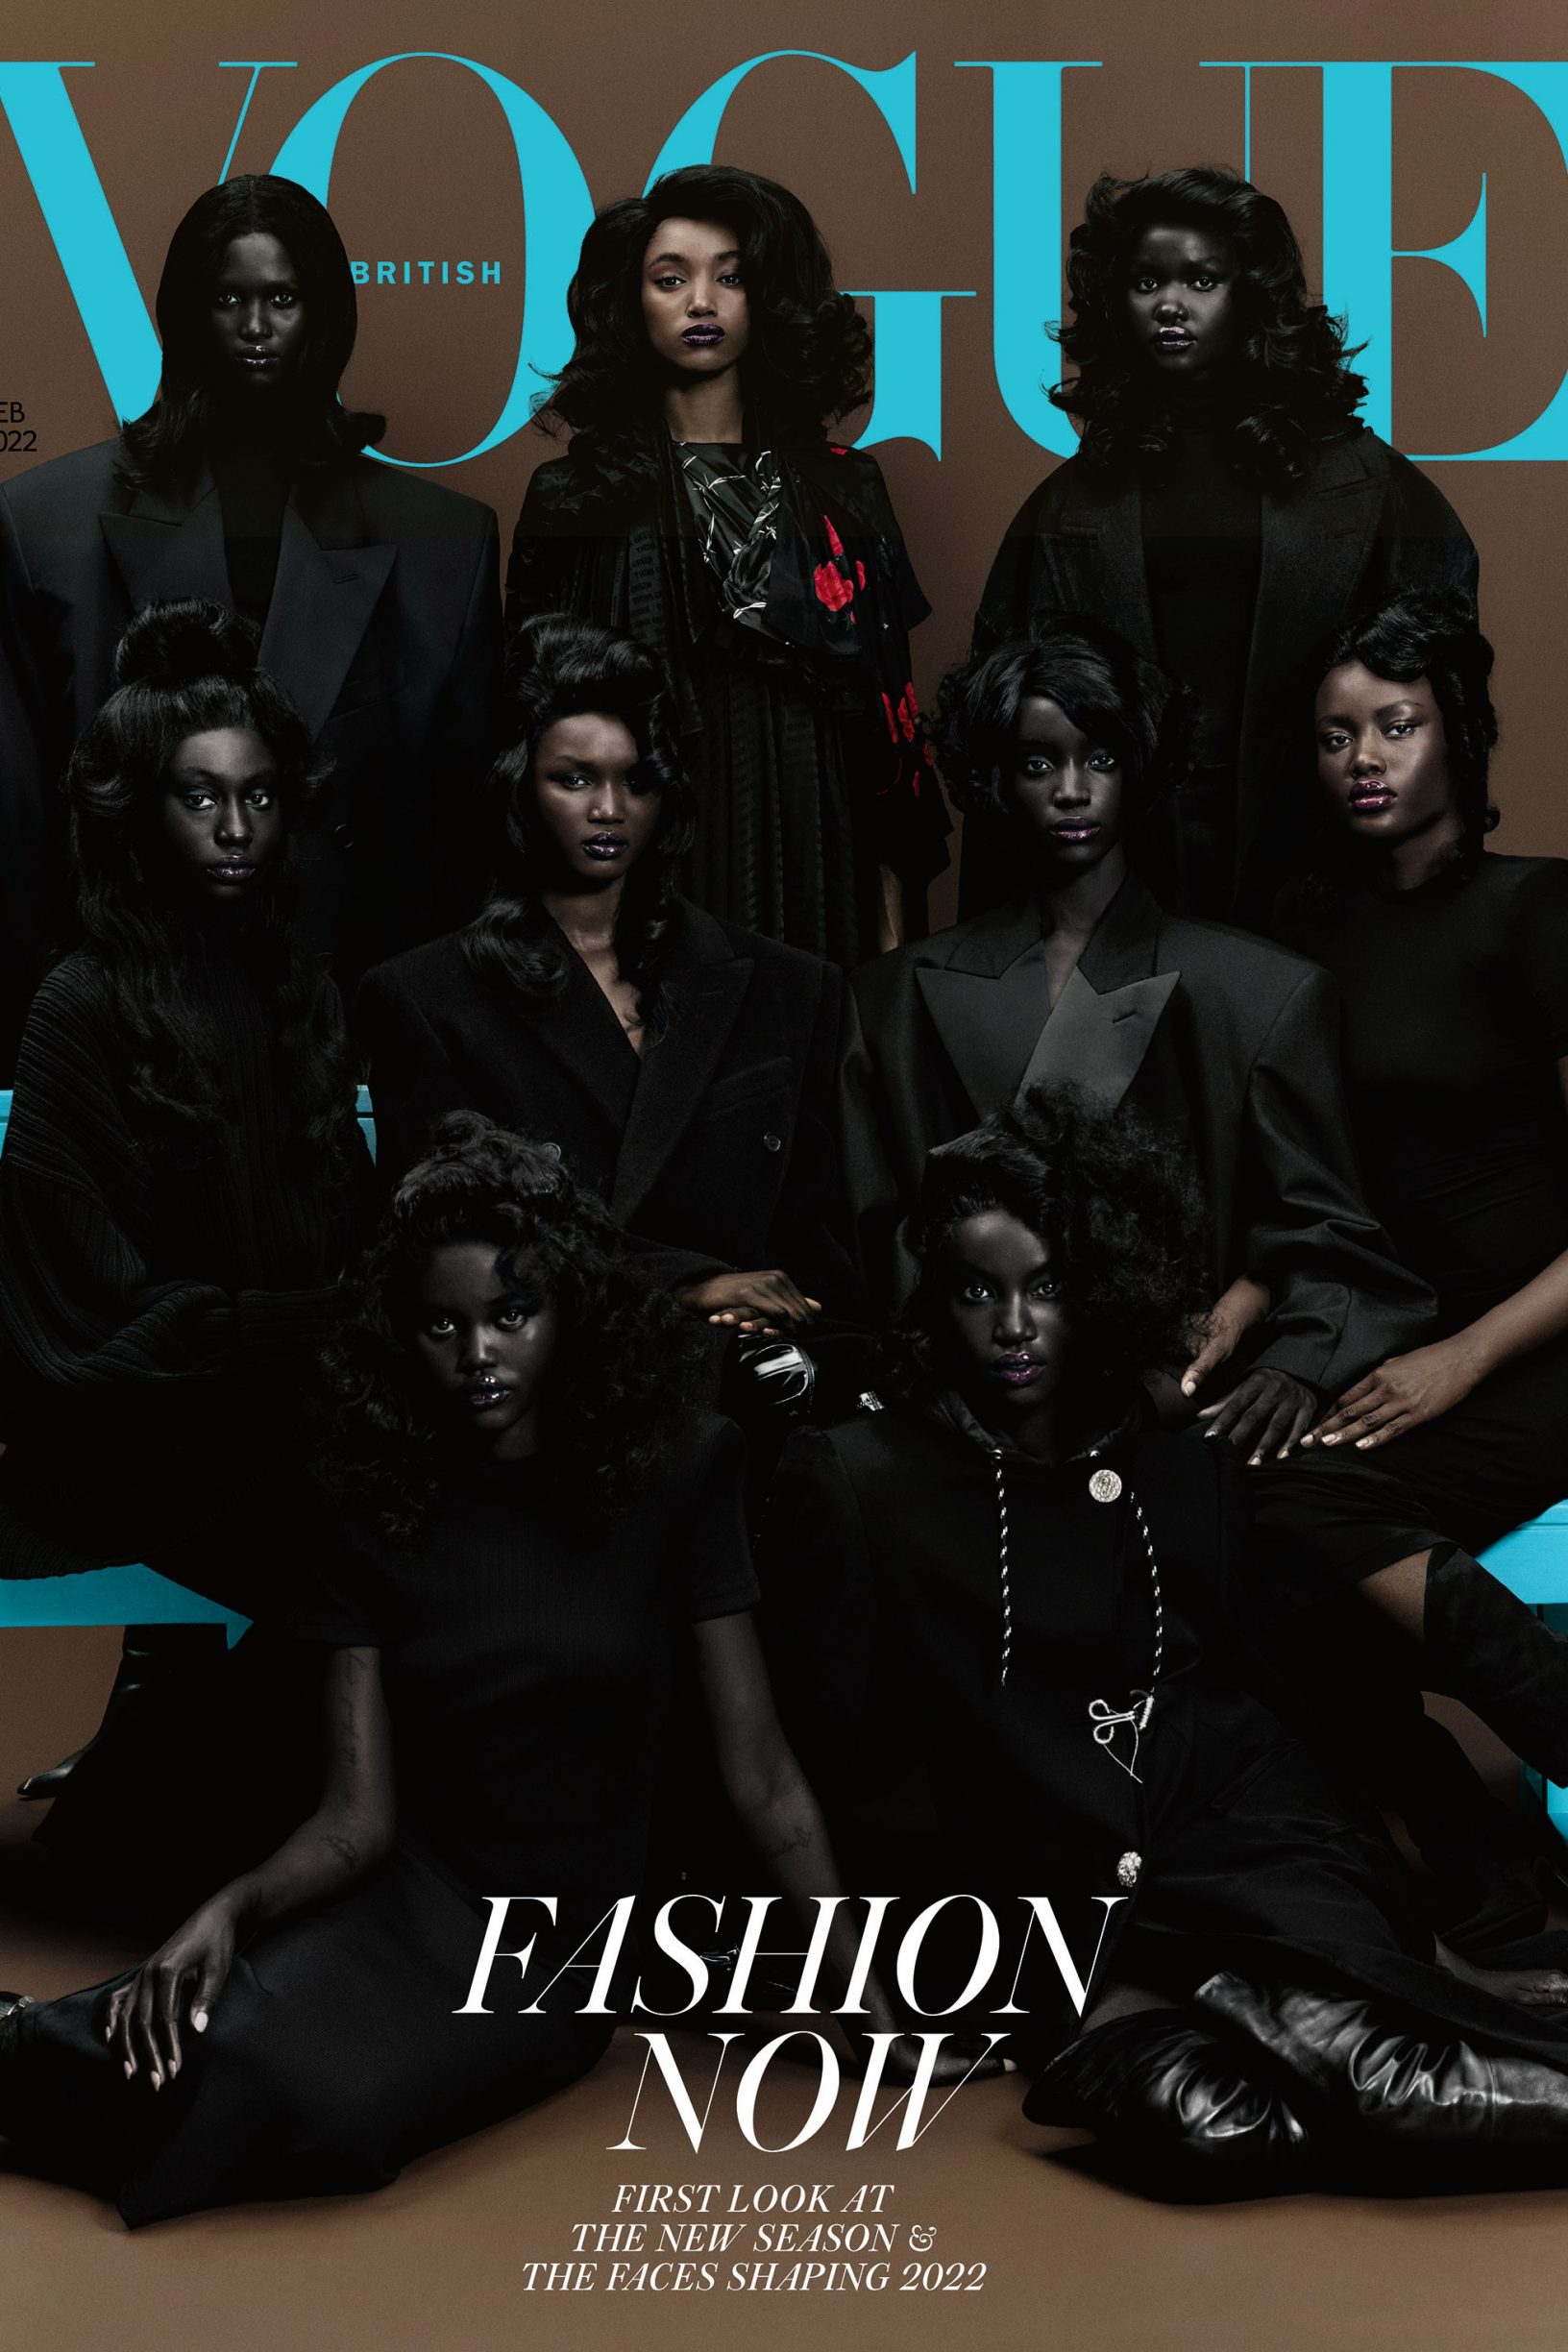 British Vogue’s Momentous All African Cover Spotlights 9 Young Women Redefining What It Is To Be A Model